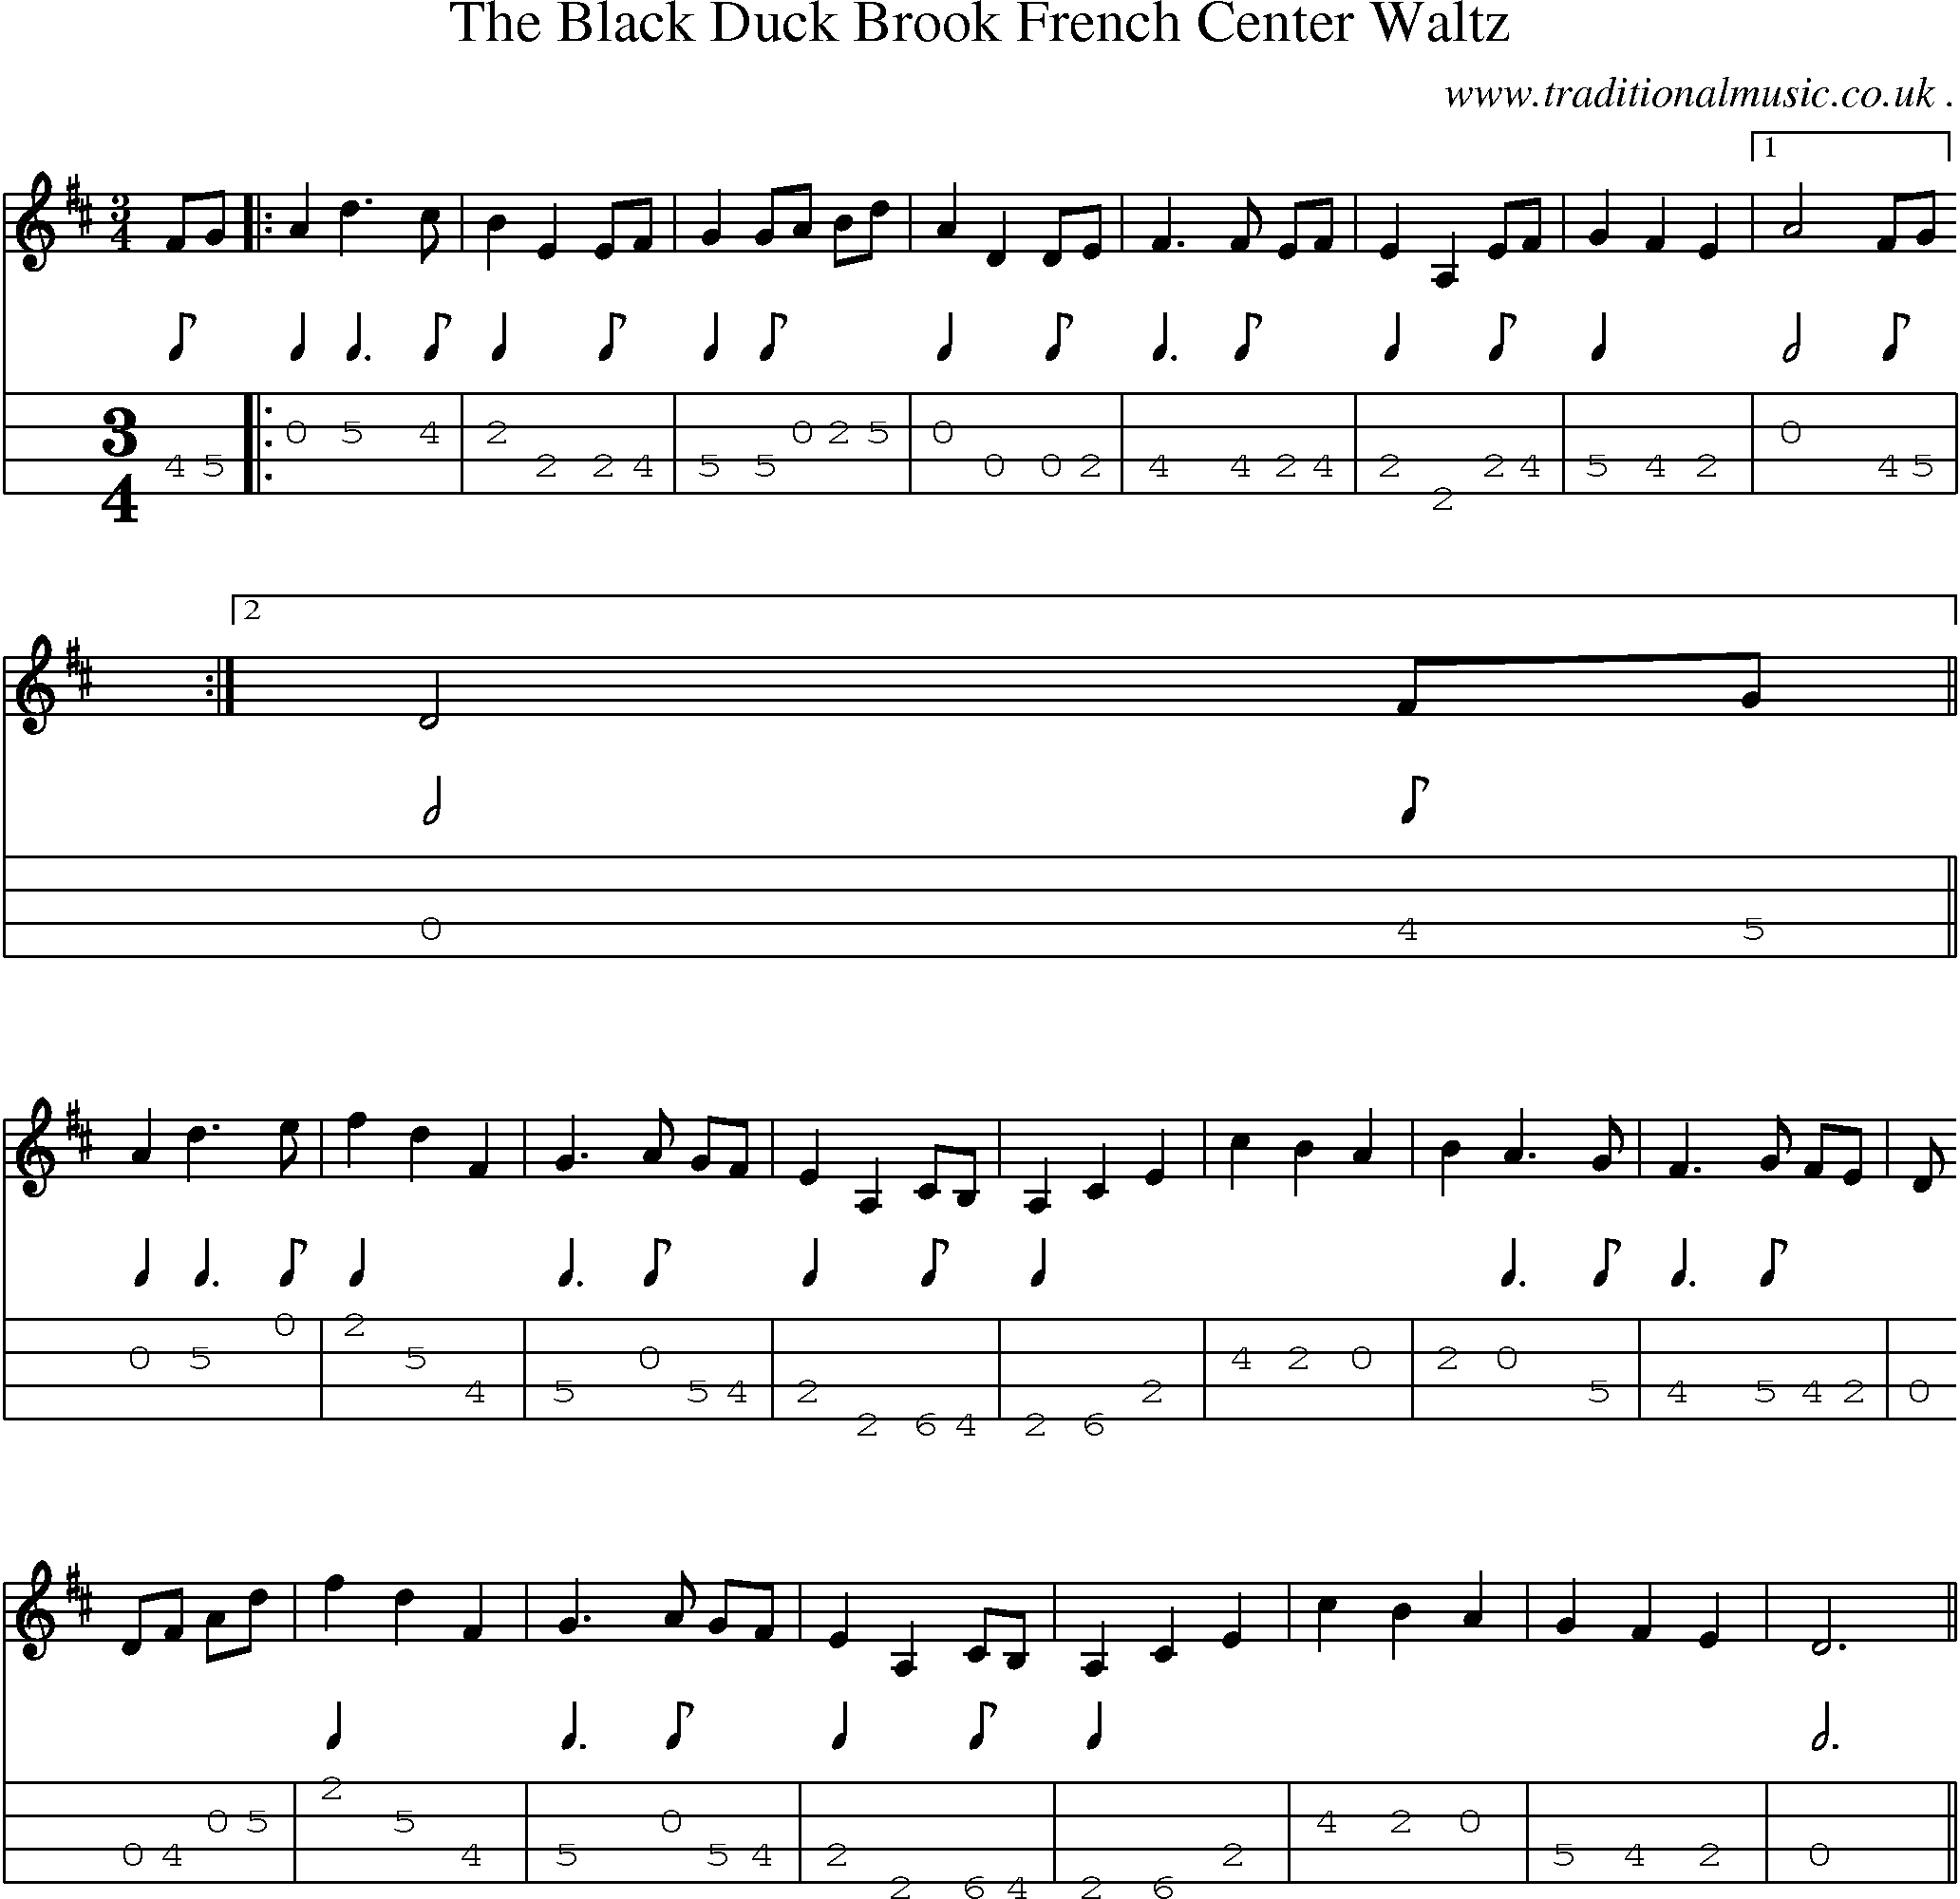 Sheet-Music and Mandolin Tabs for The Black Duck Brook French Center Waltz